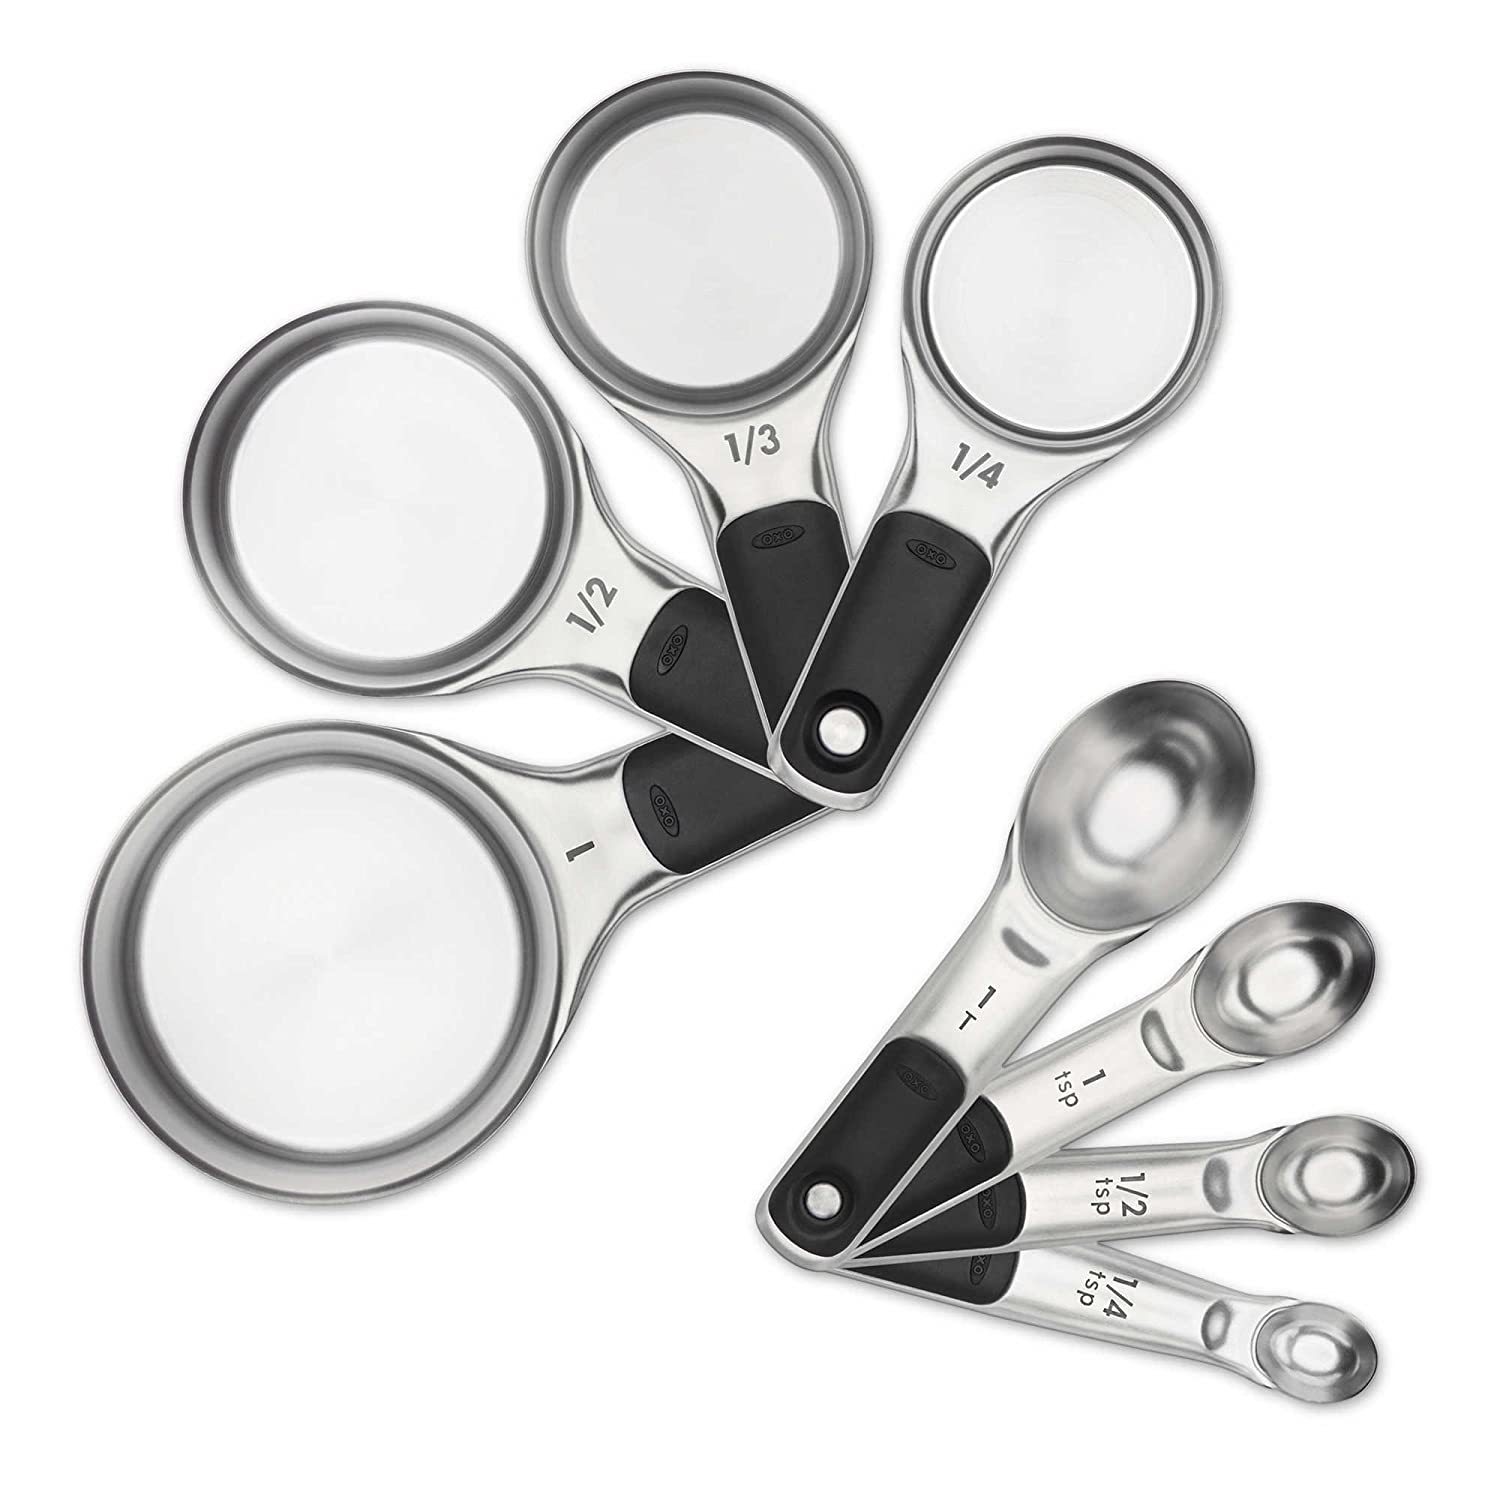 Chef Craft Select Plastic Measuring Scoop, 1/4 tsp, 1/2 tsp, 1 tsp, 1 tbsp,  1/4 cup, 1/3 cup, 1/2 cup and 1 cup size, White